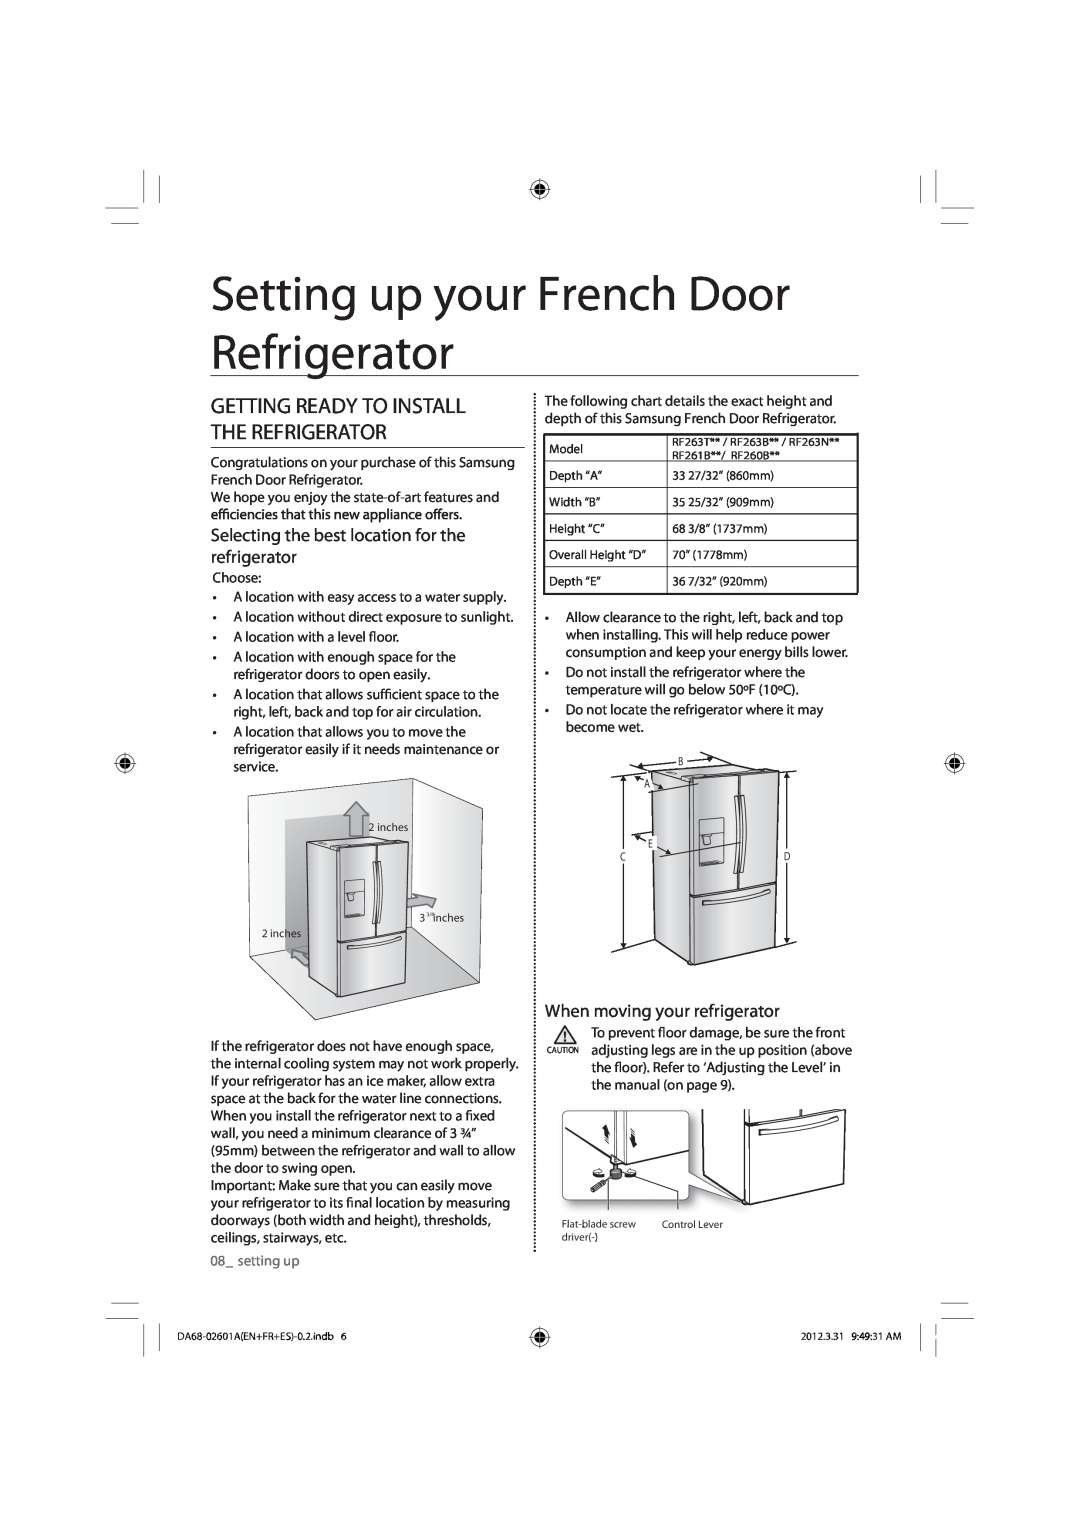 Samsung RF263BEAESR Setting up your French Door Refrigerator, Getting Ready To Install The Refrigerator, setting up 